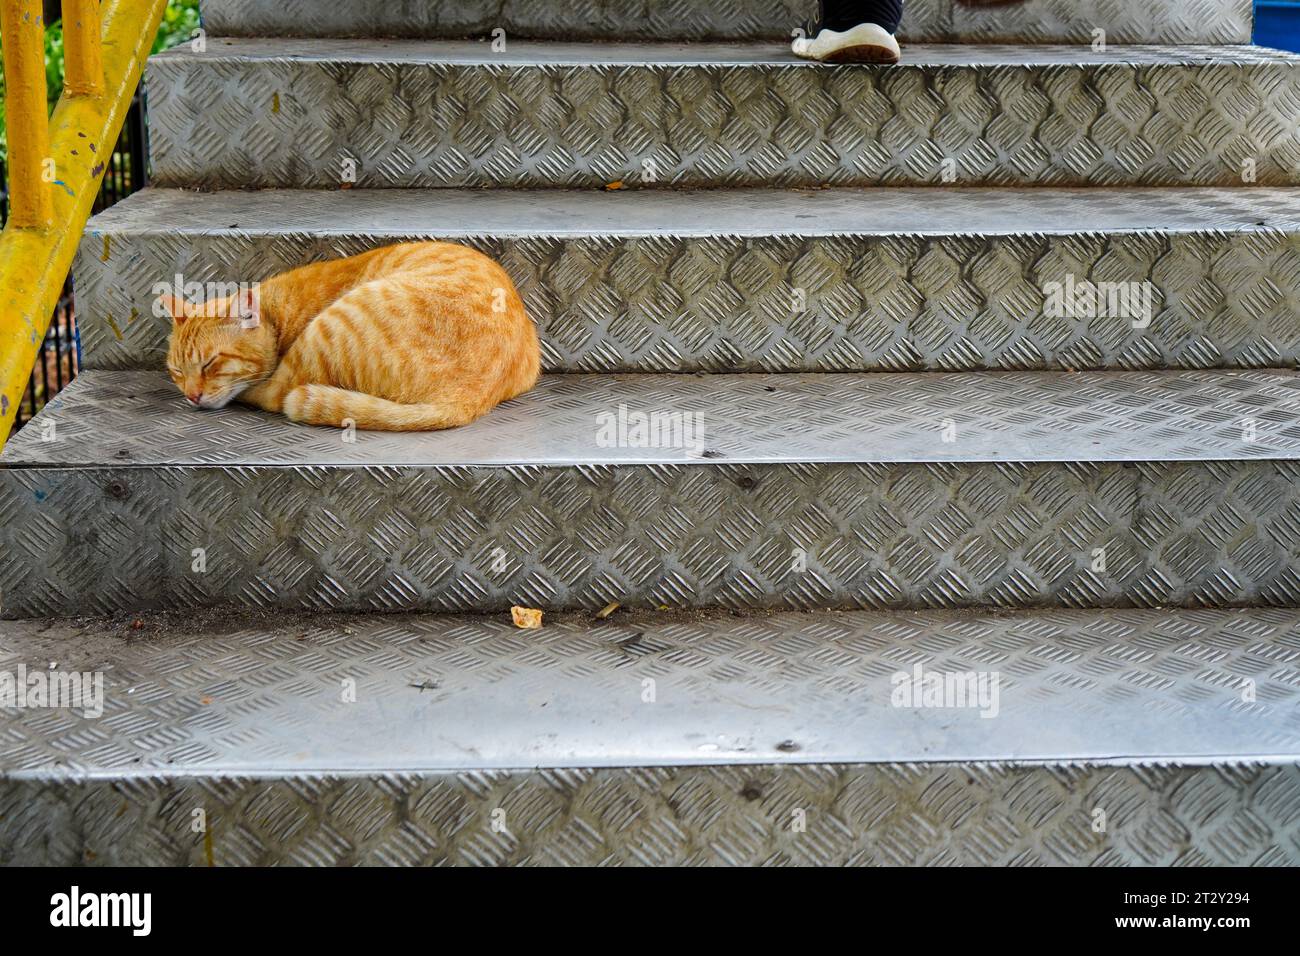 a slumbering orange stray cat resting on an iron staircase, radiating a calming presence amidst urban surroundings Stock Photo